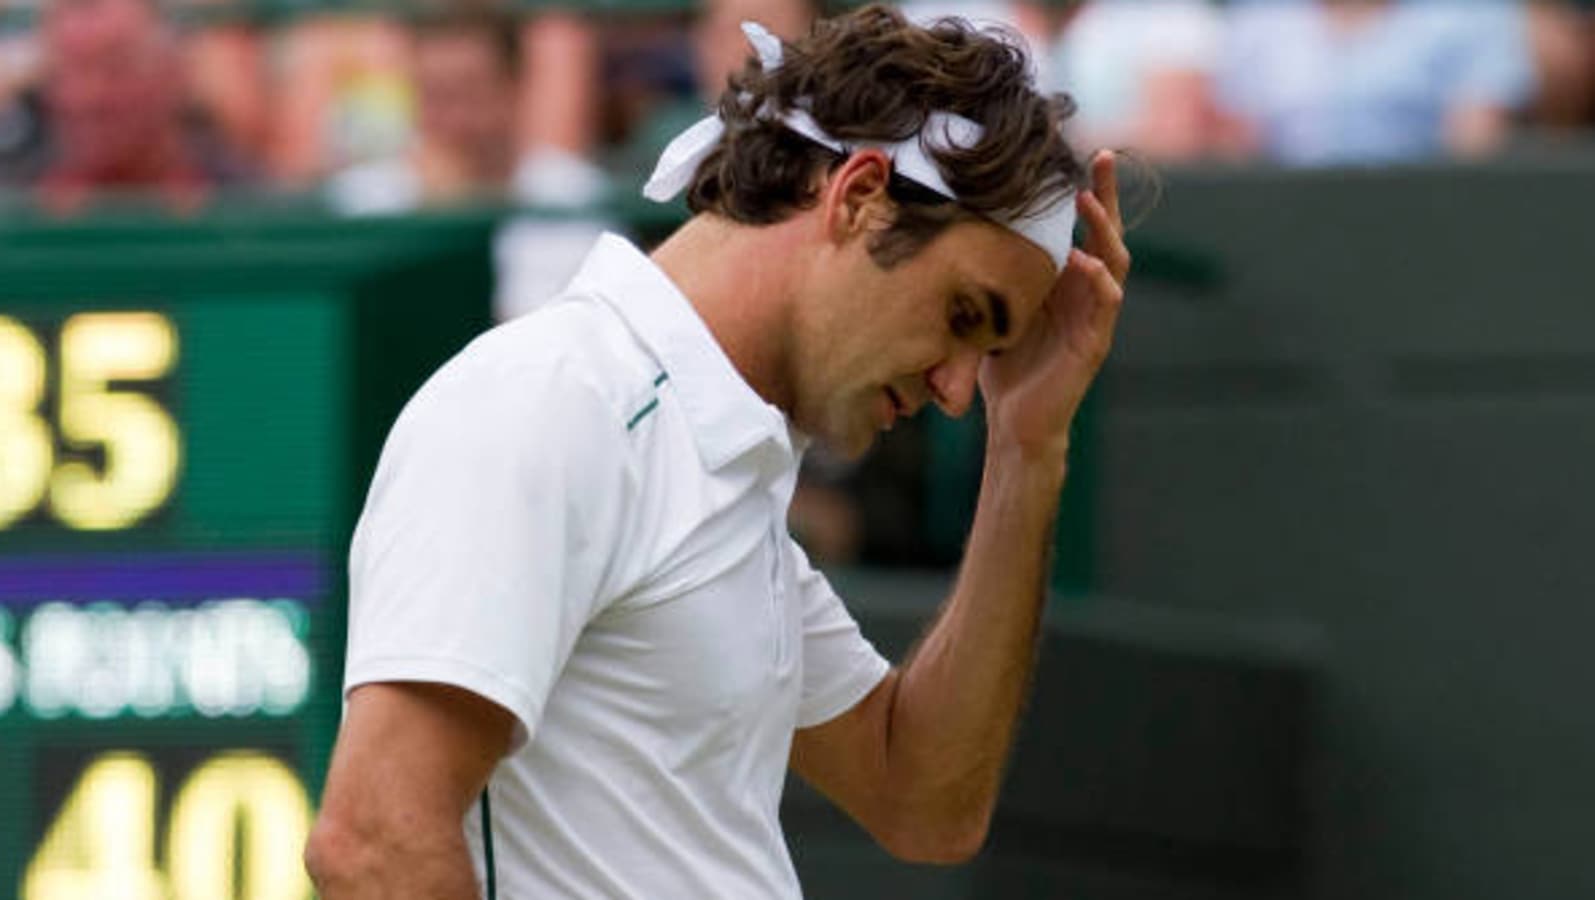 ‘Do you have a membership card?’: Roger Federer reveals bizarre story about being denied entry inside WImbledon